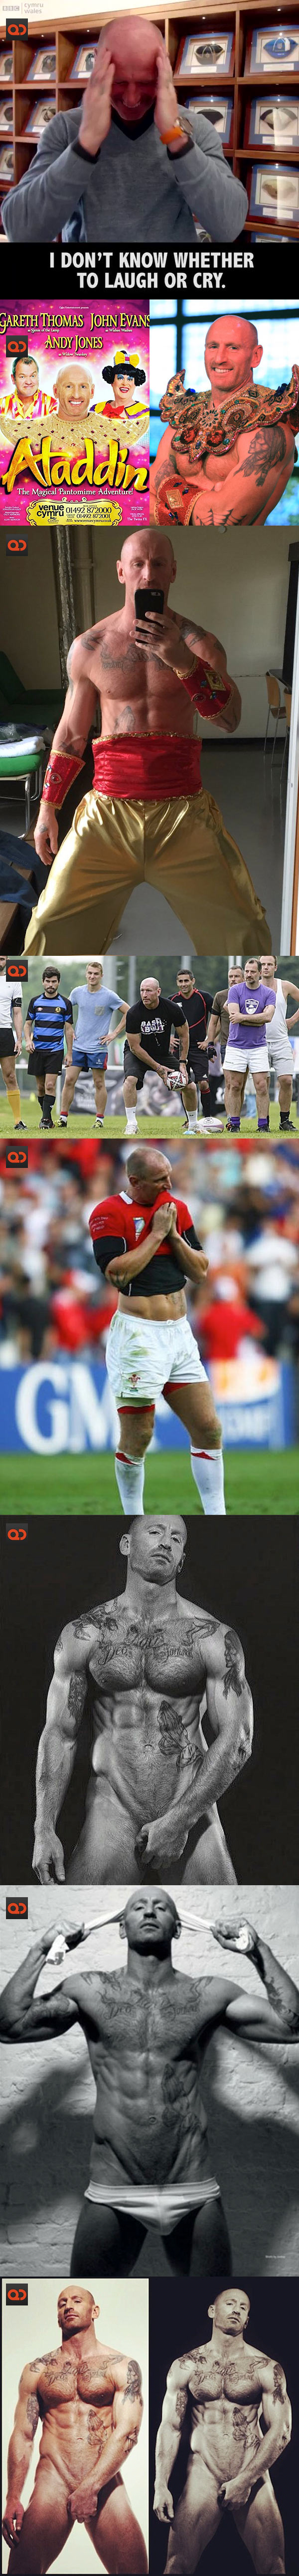 Gareth Thomas, English Rugby Star, Alleged Dick Pics Appear Online!